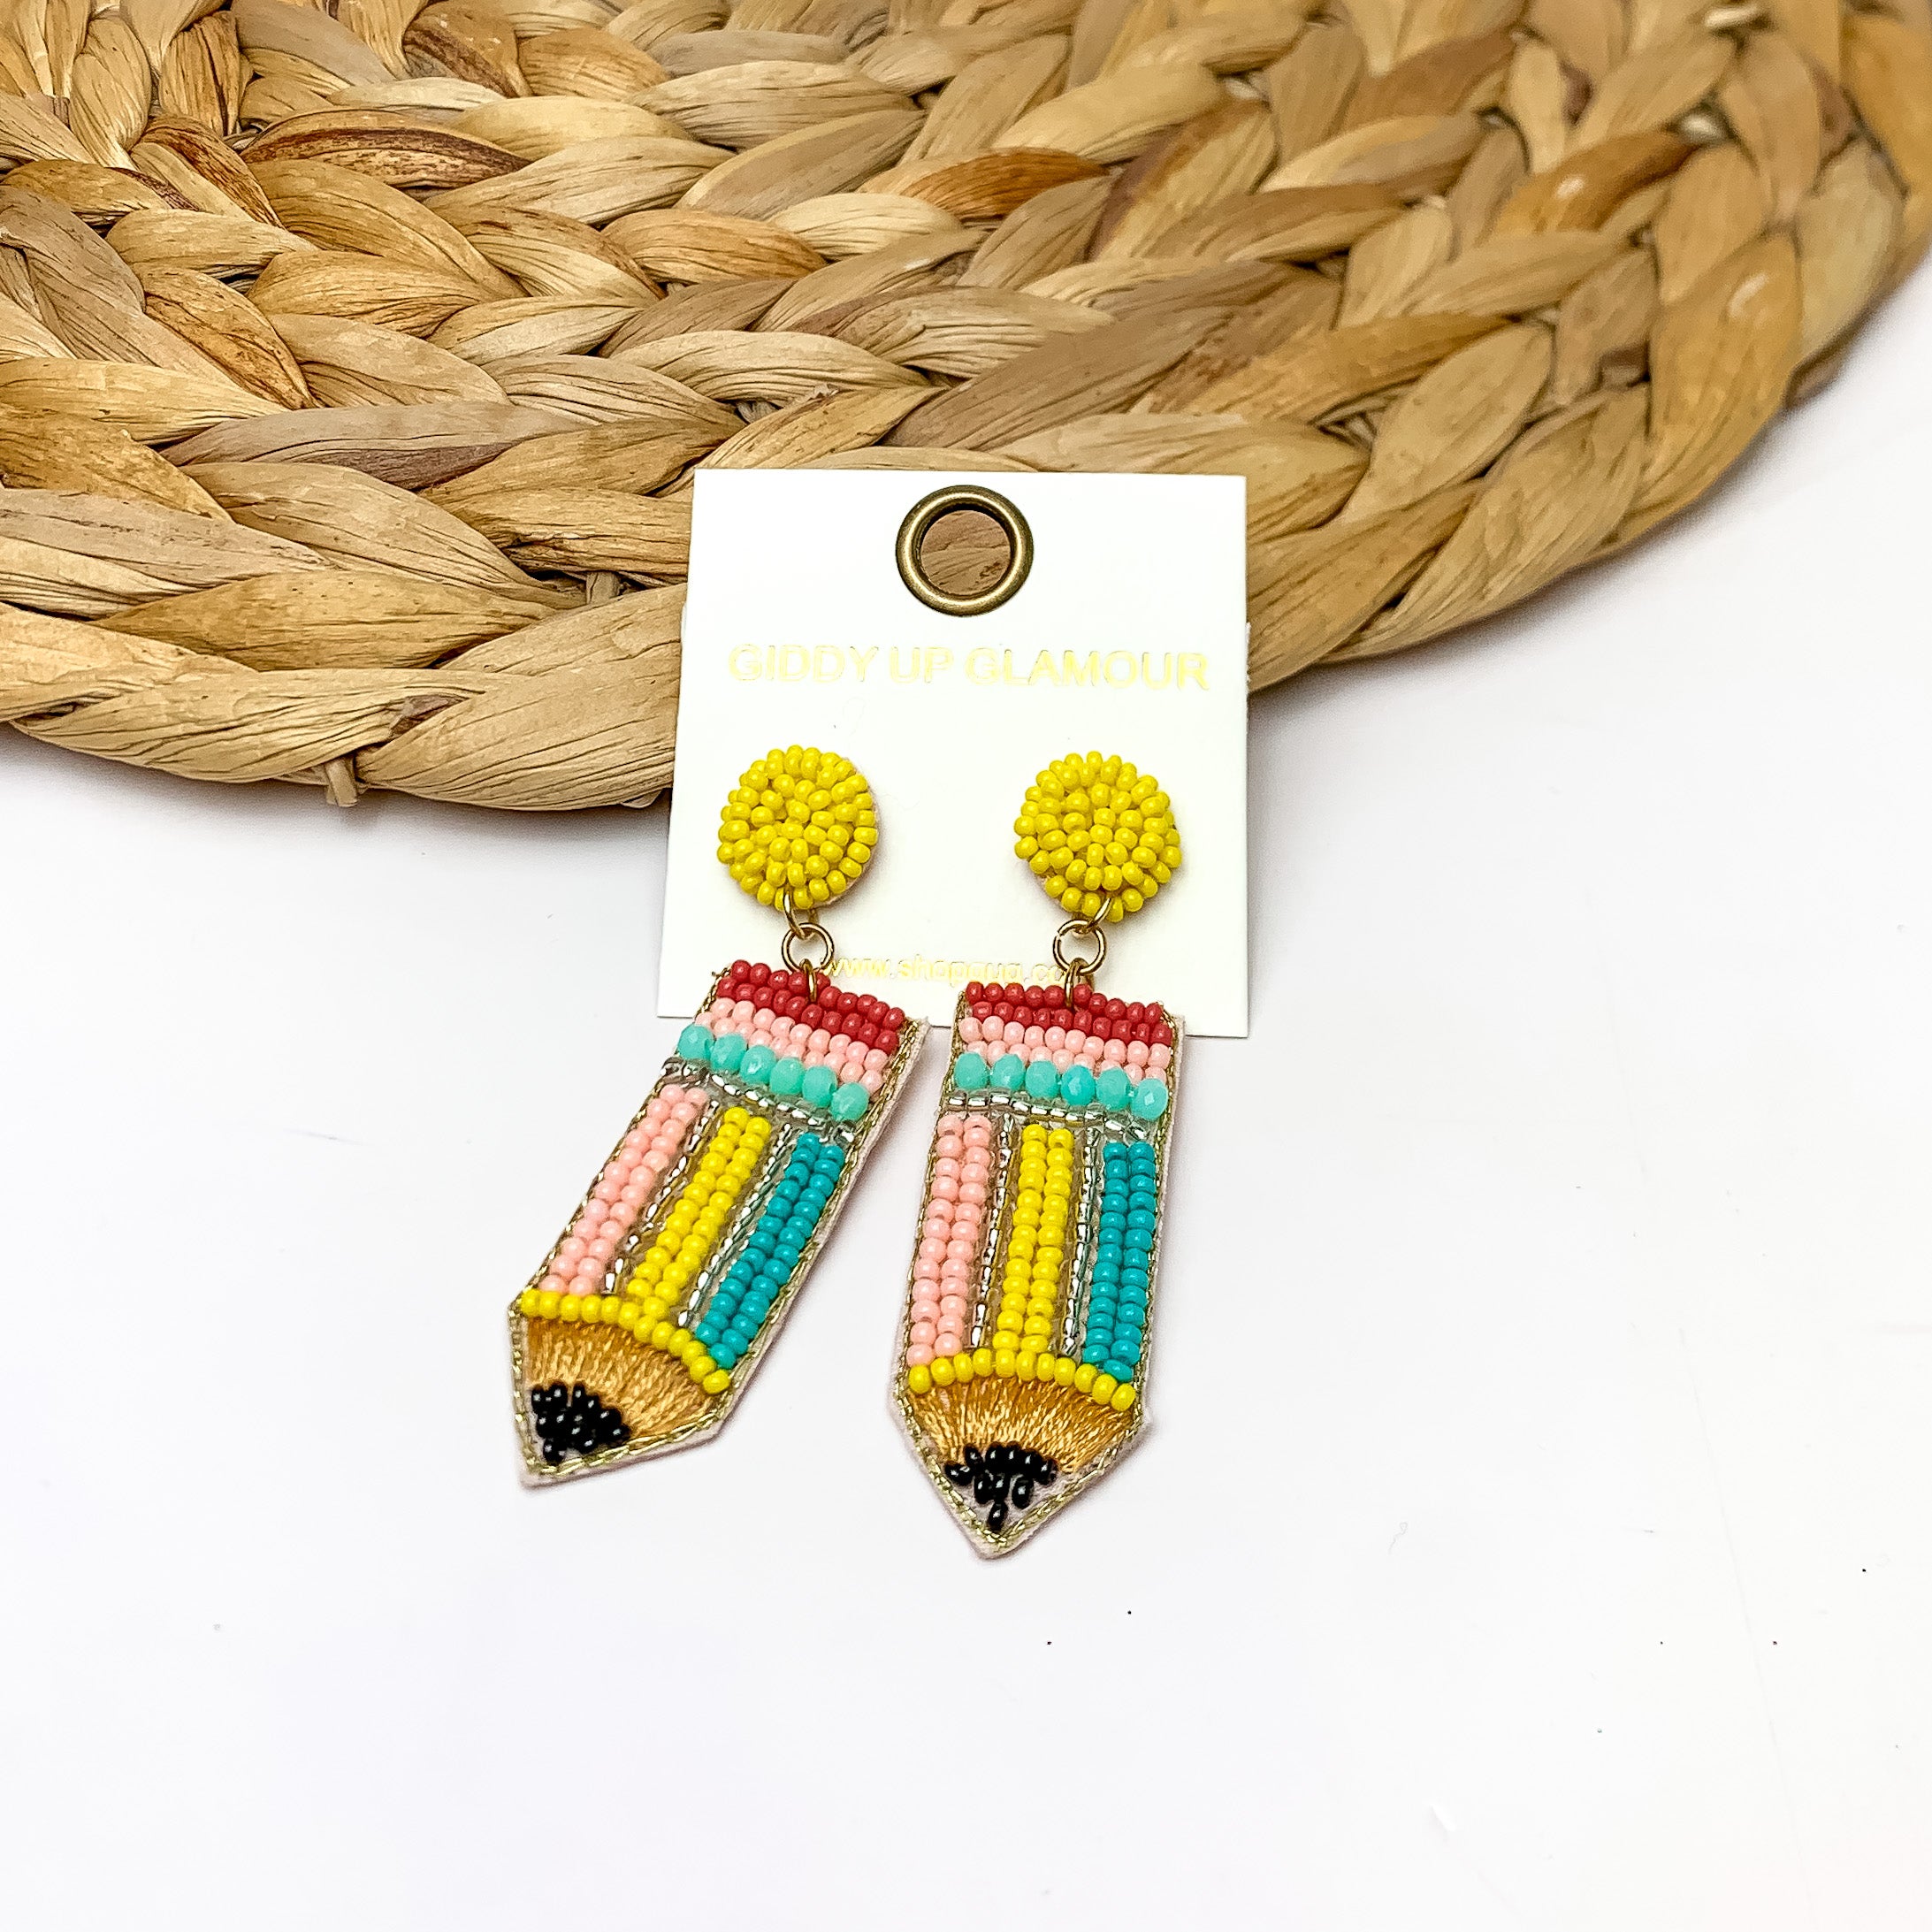 Beaded Pencil Earrings in Multicolor. Pictured on a white background with the earrings laying against a wicker piece.